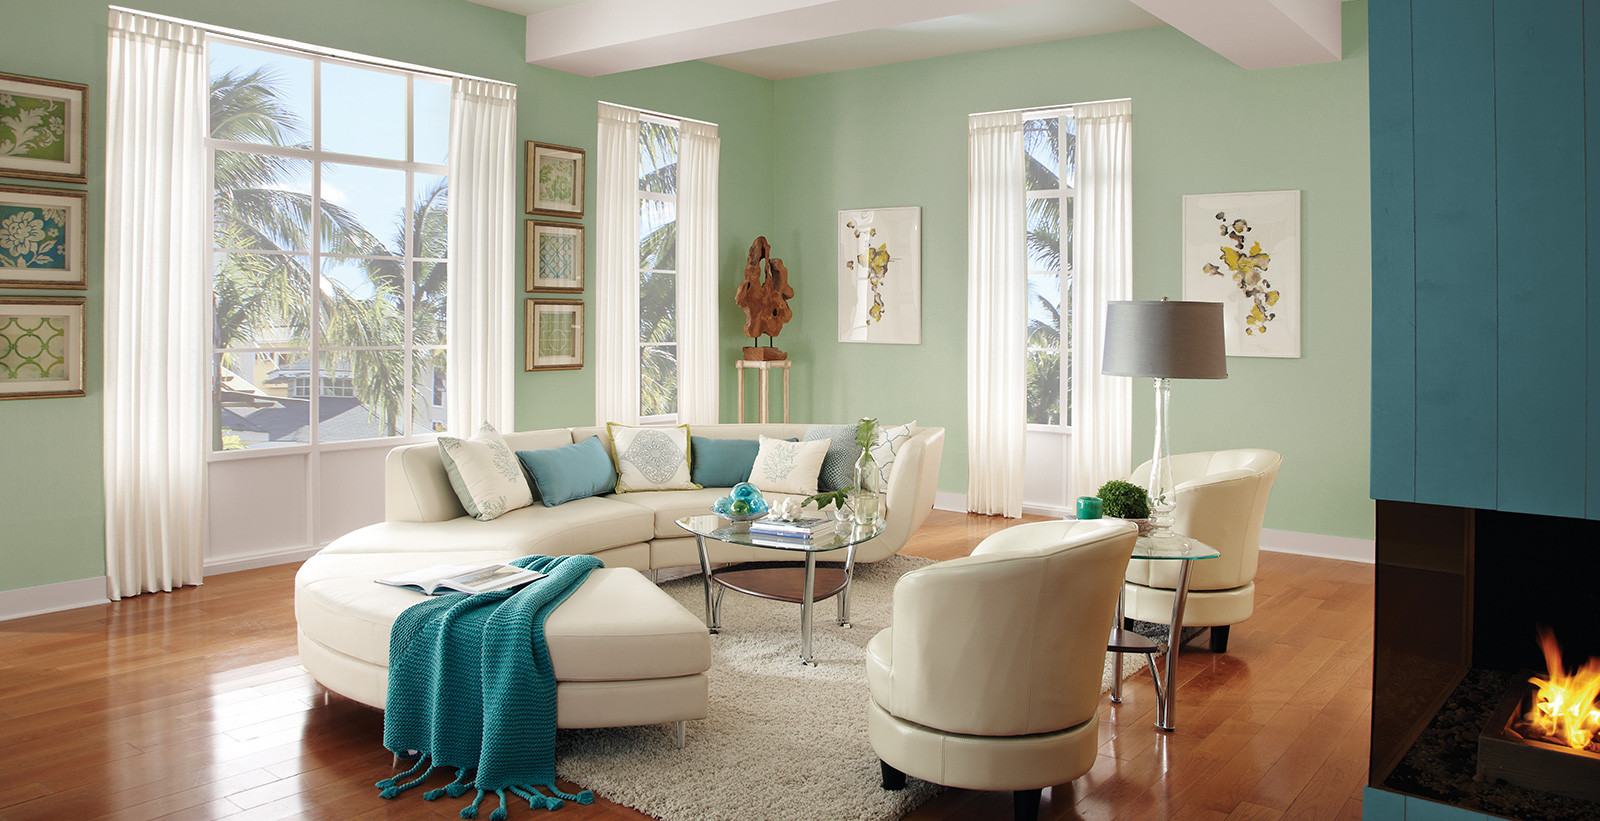 Interior Paint Ideas Living Room
 Calming Living Room Ideas and Inspirational Paint Colors